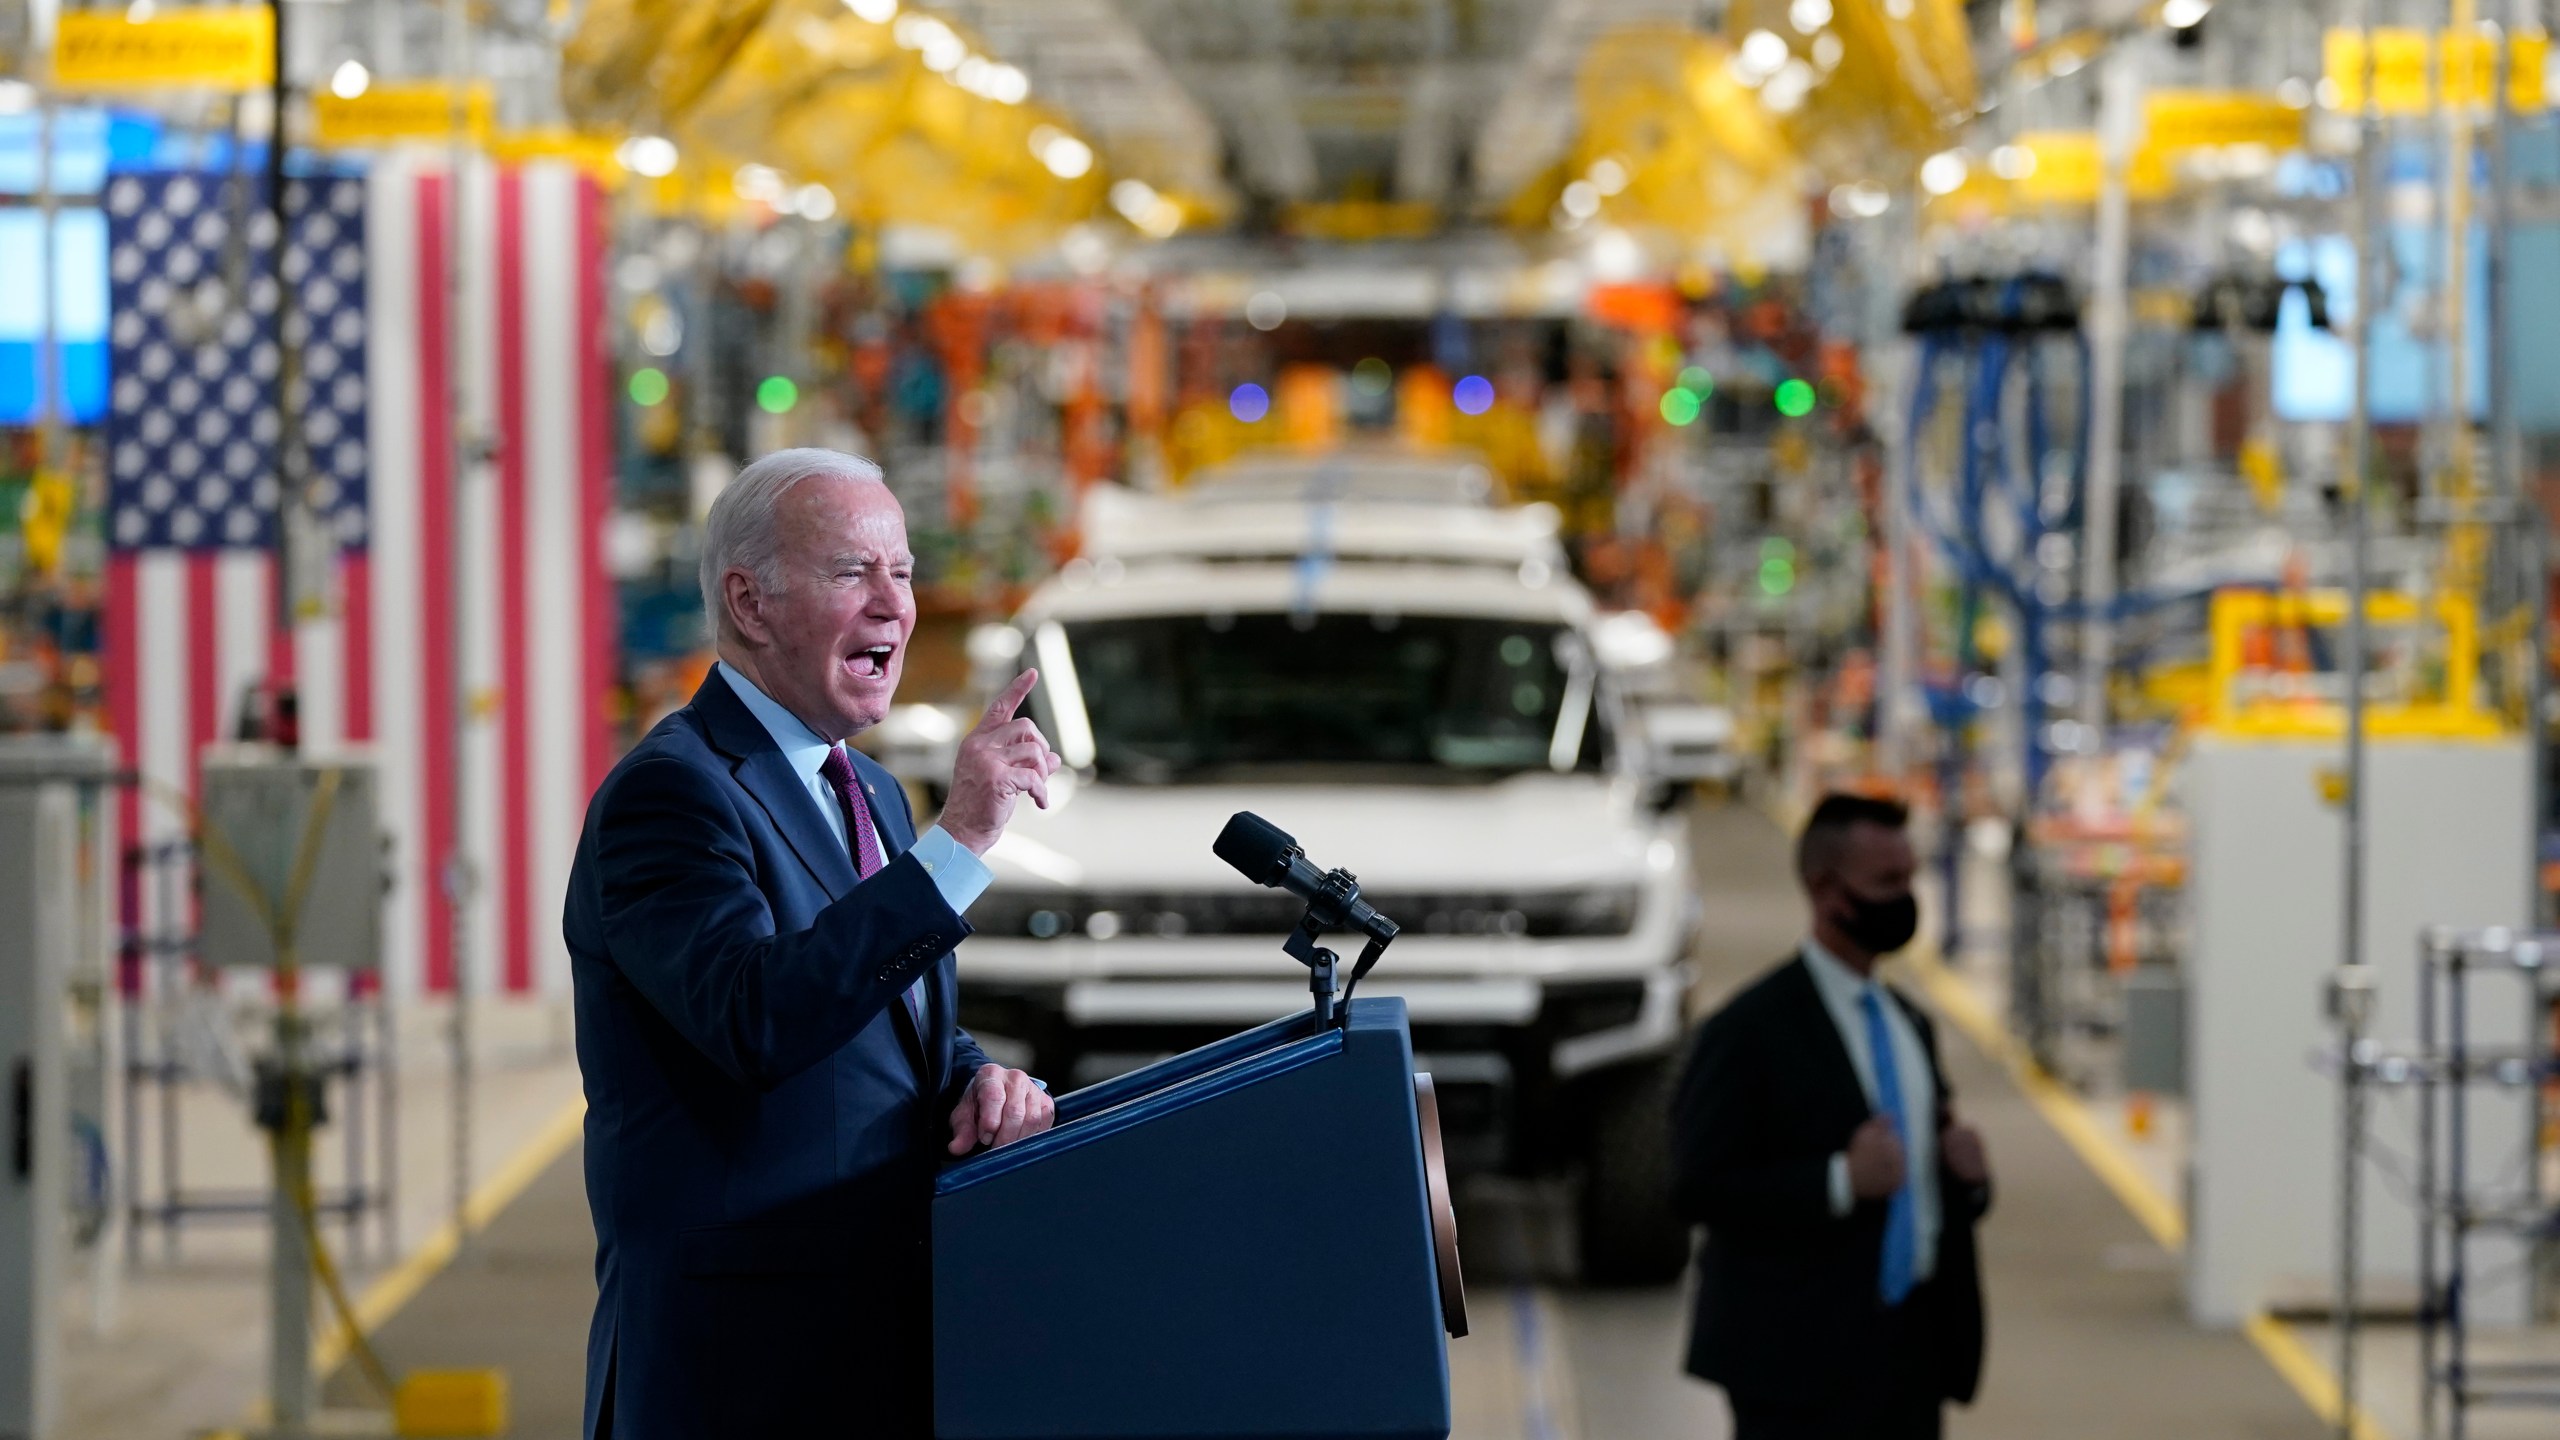 FILE - President Joe Biden speaks during a visit to the General Motors Factory ZERO electric vehicle assembly plant, Nov. 17, 2021, in Detroit. The Biden administration this week is expected to announce new automobile emissions standards that relax proposed limits in the next few years but reach the same strict standards outlined by the Environmental Protection Agency last year. (AP Photo/Evan Vucci, File)